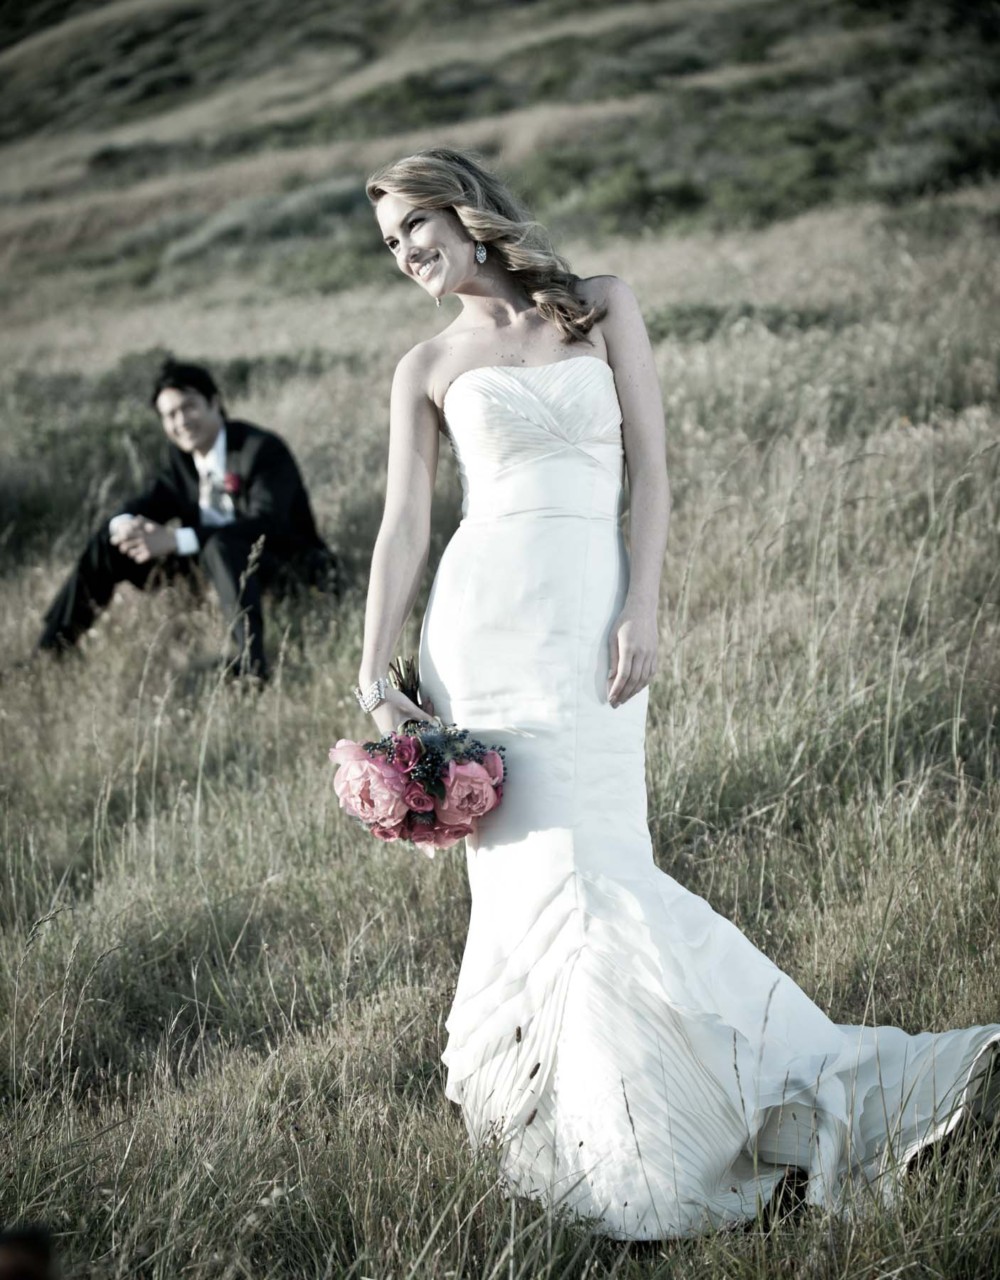 Looking for a top wedding photographer in Talkeetna?